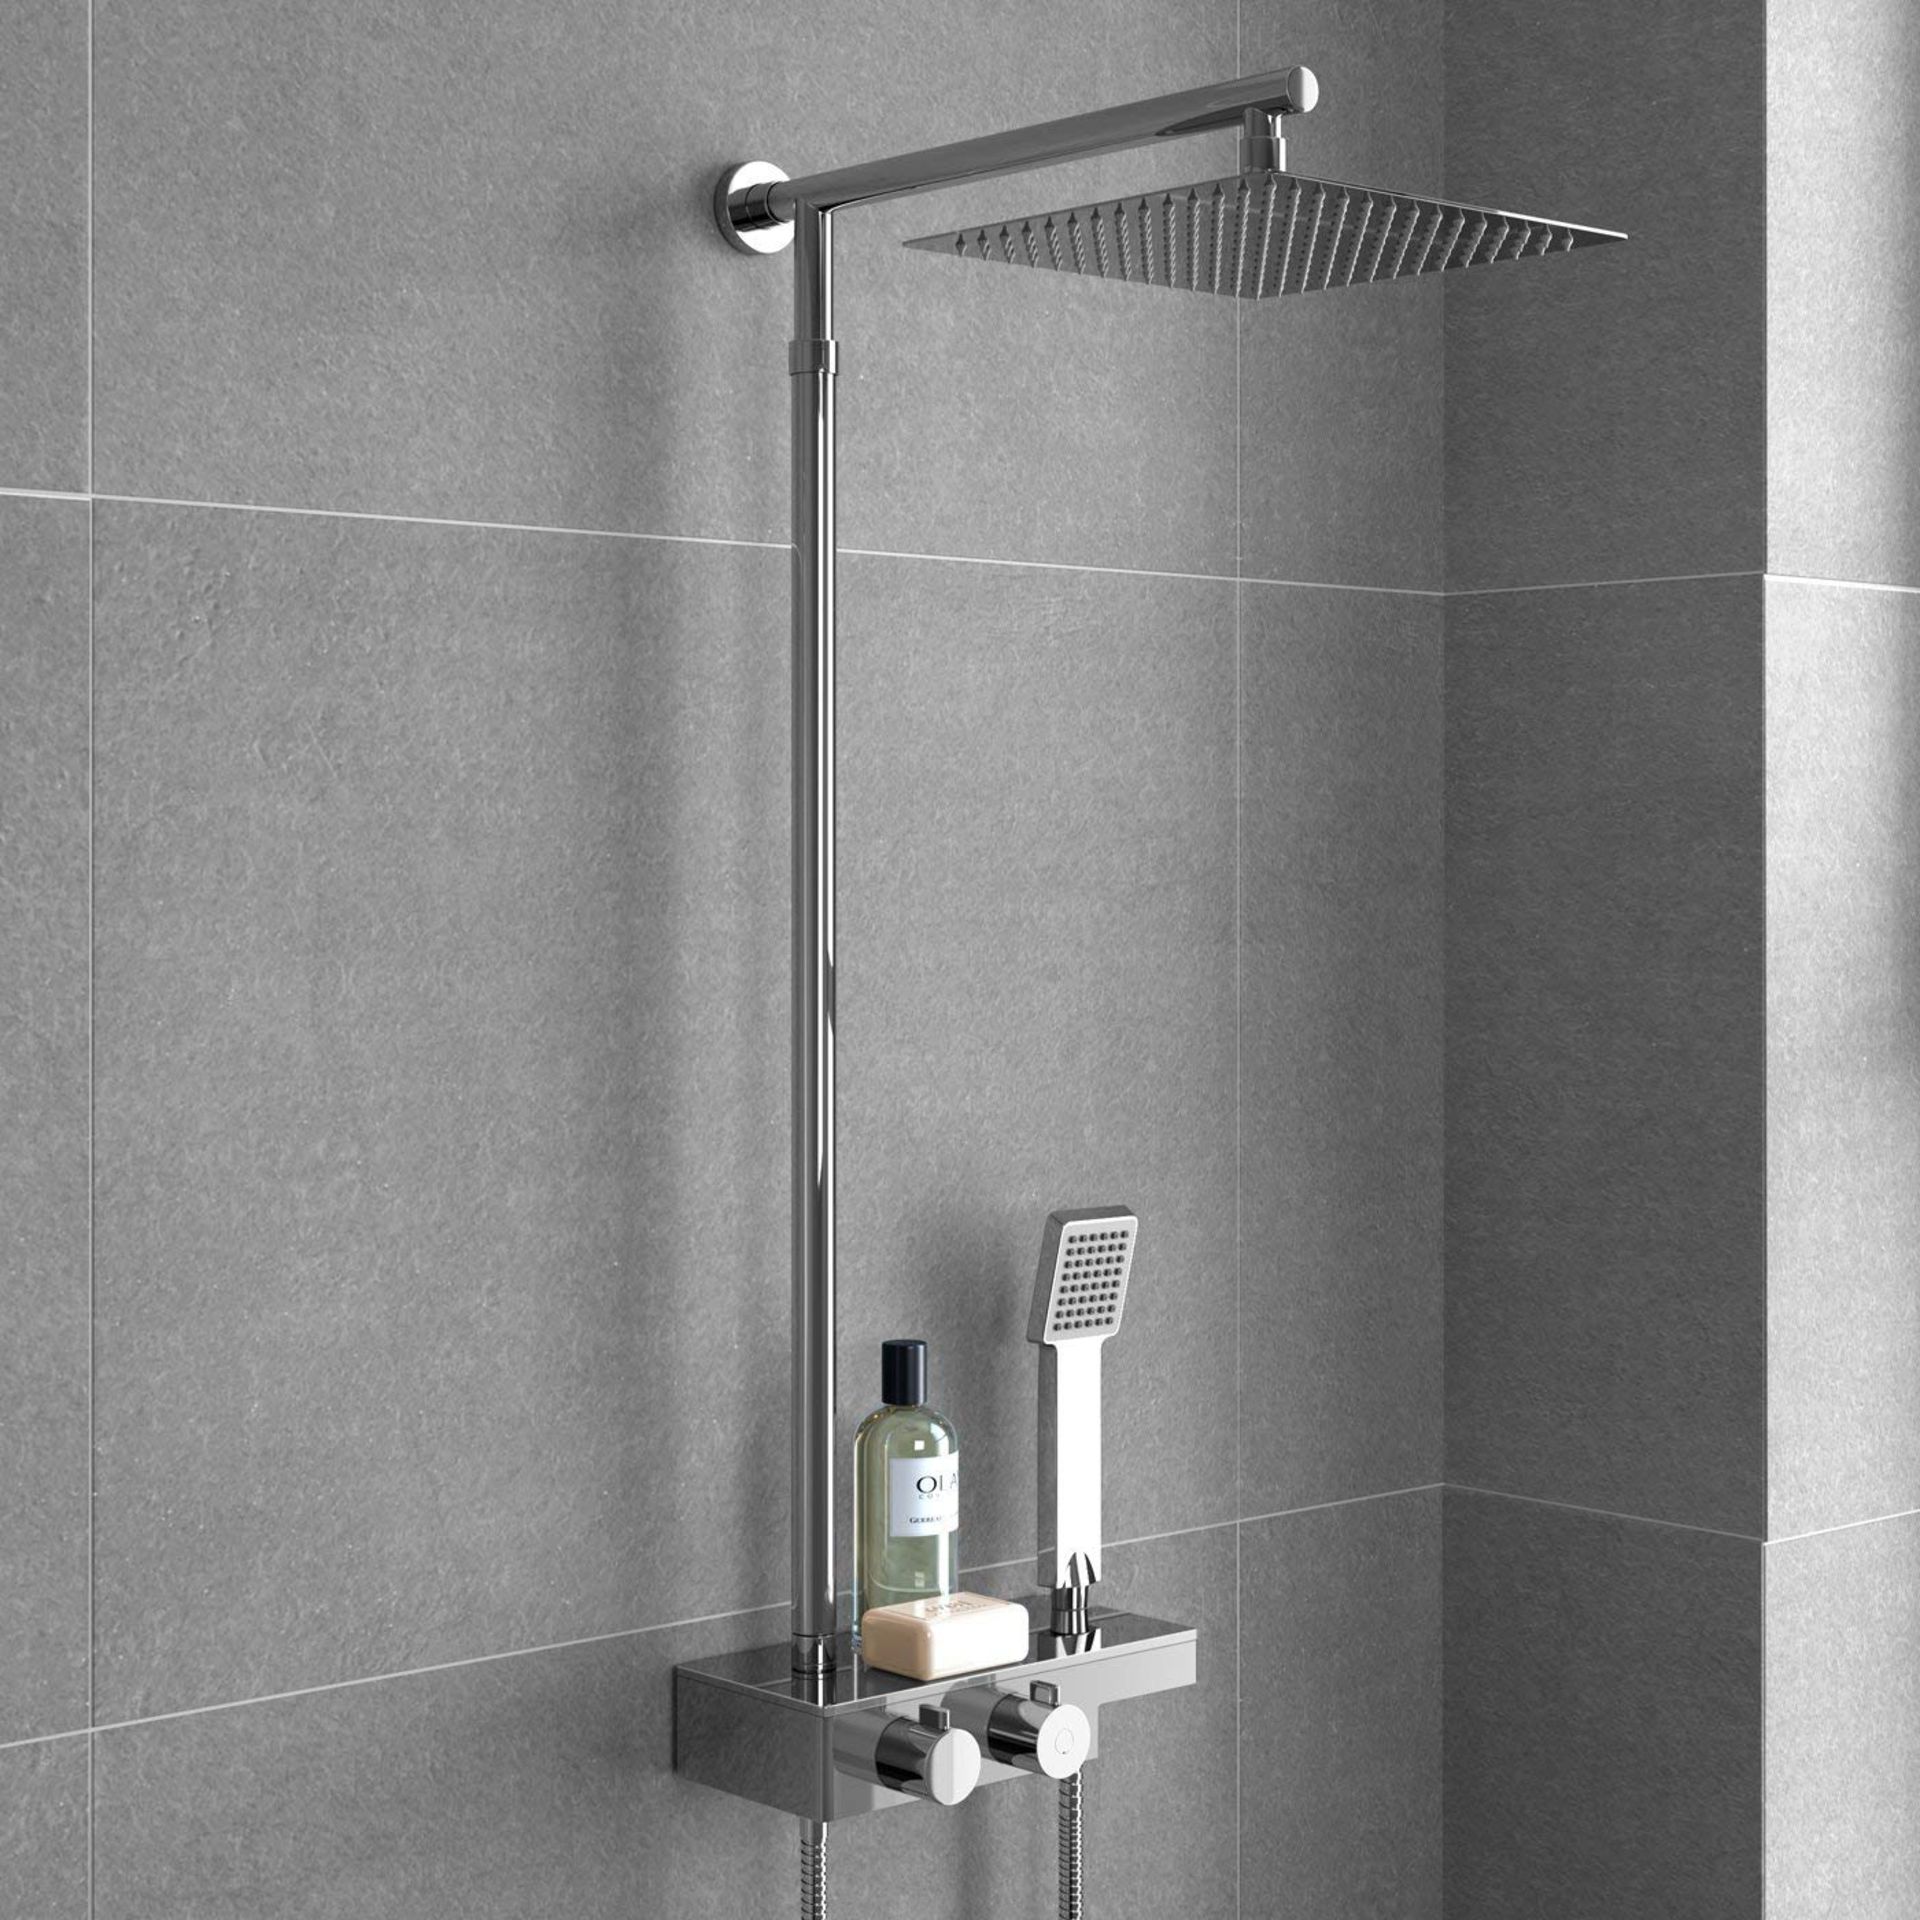 (TT199) Square Thermostatic Bar Mixer Shower Set Valve with Shelf 10" Head + Handset. RRP £349... - Image 2 of 3